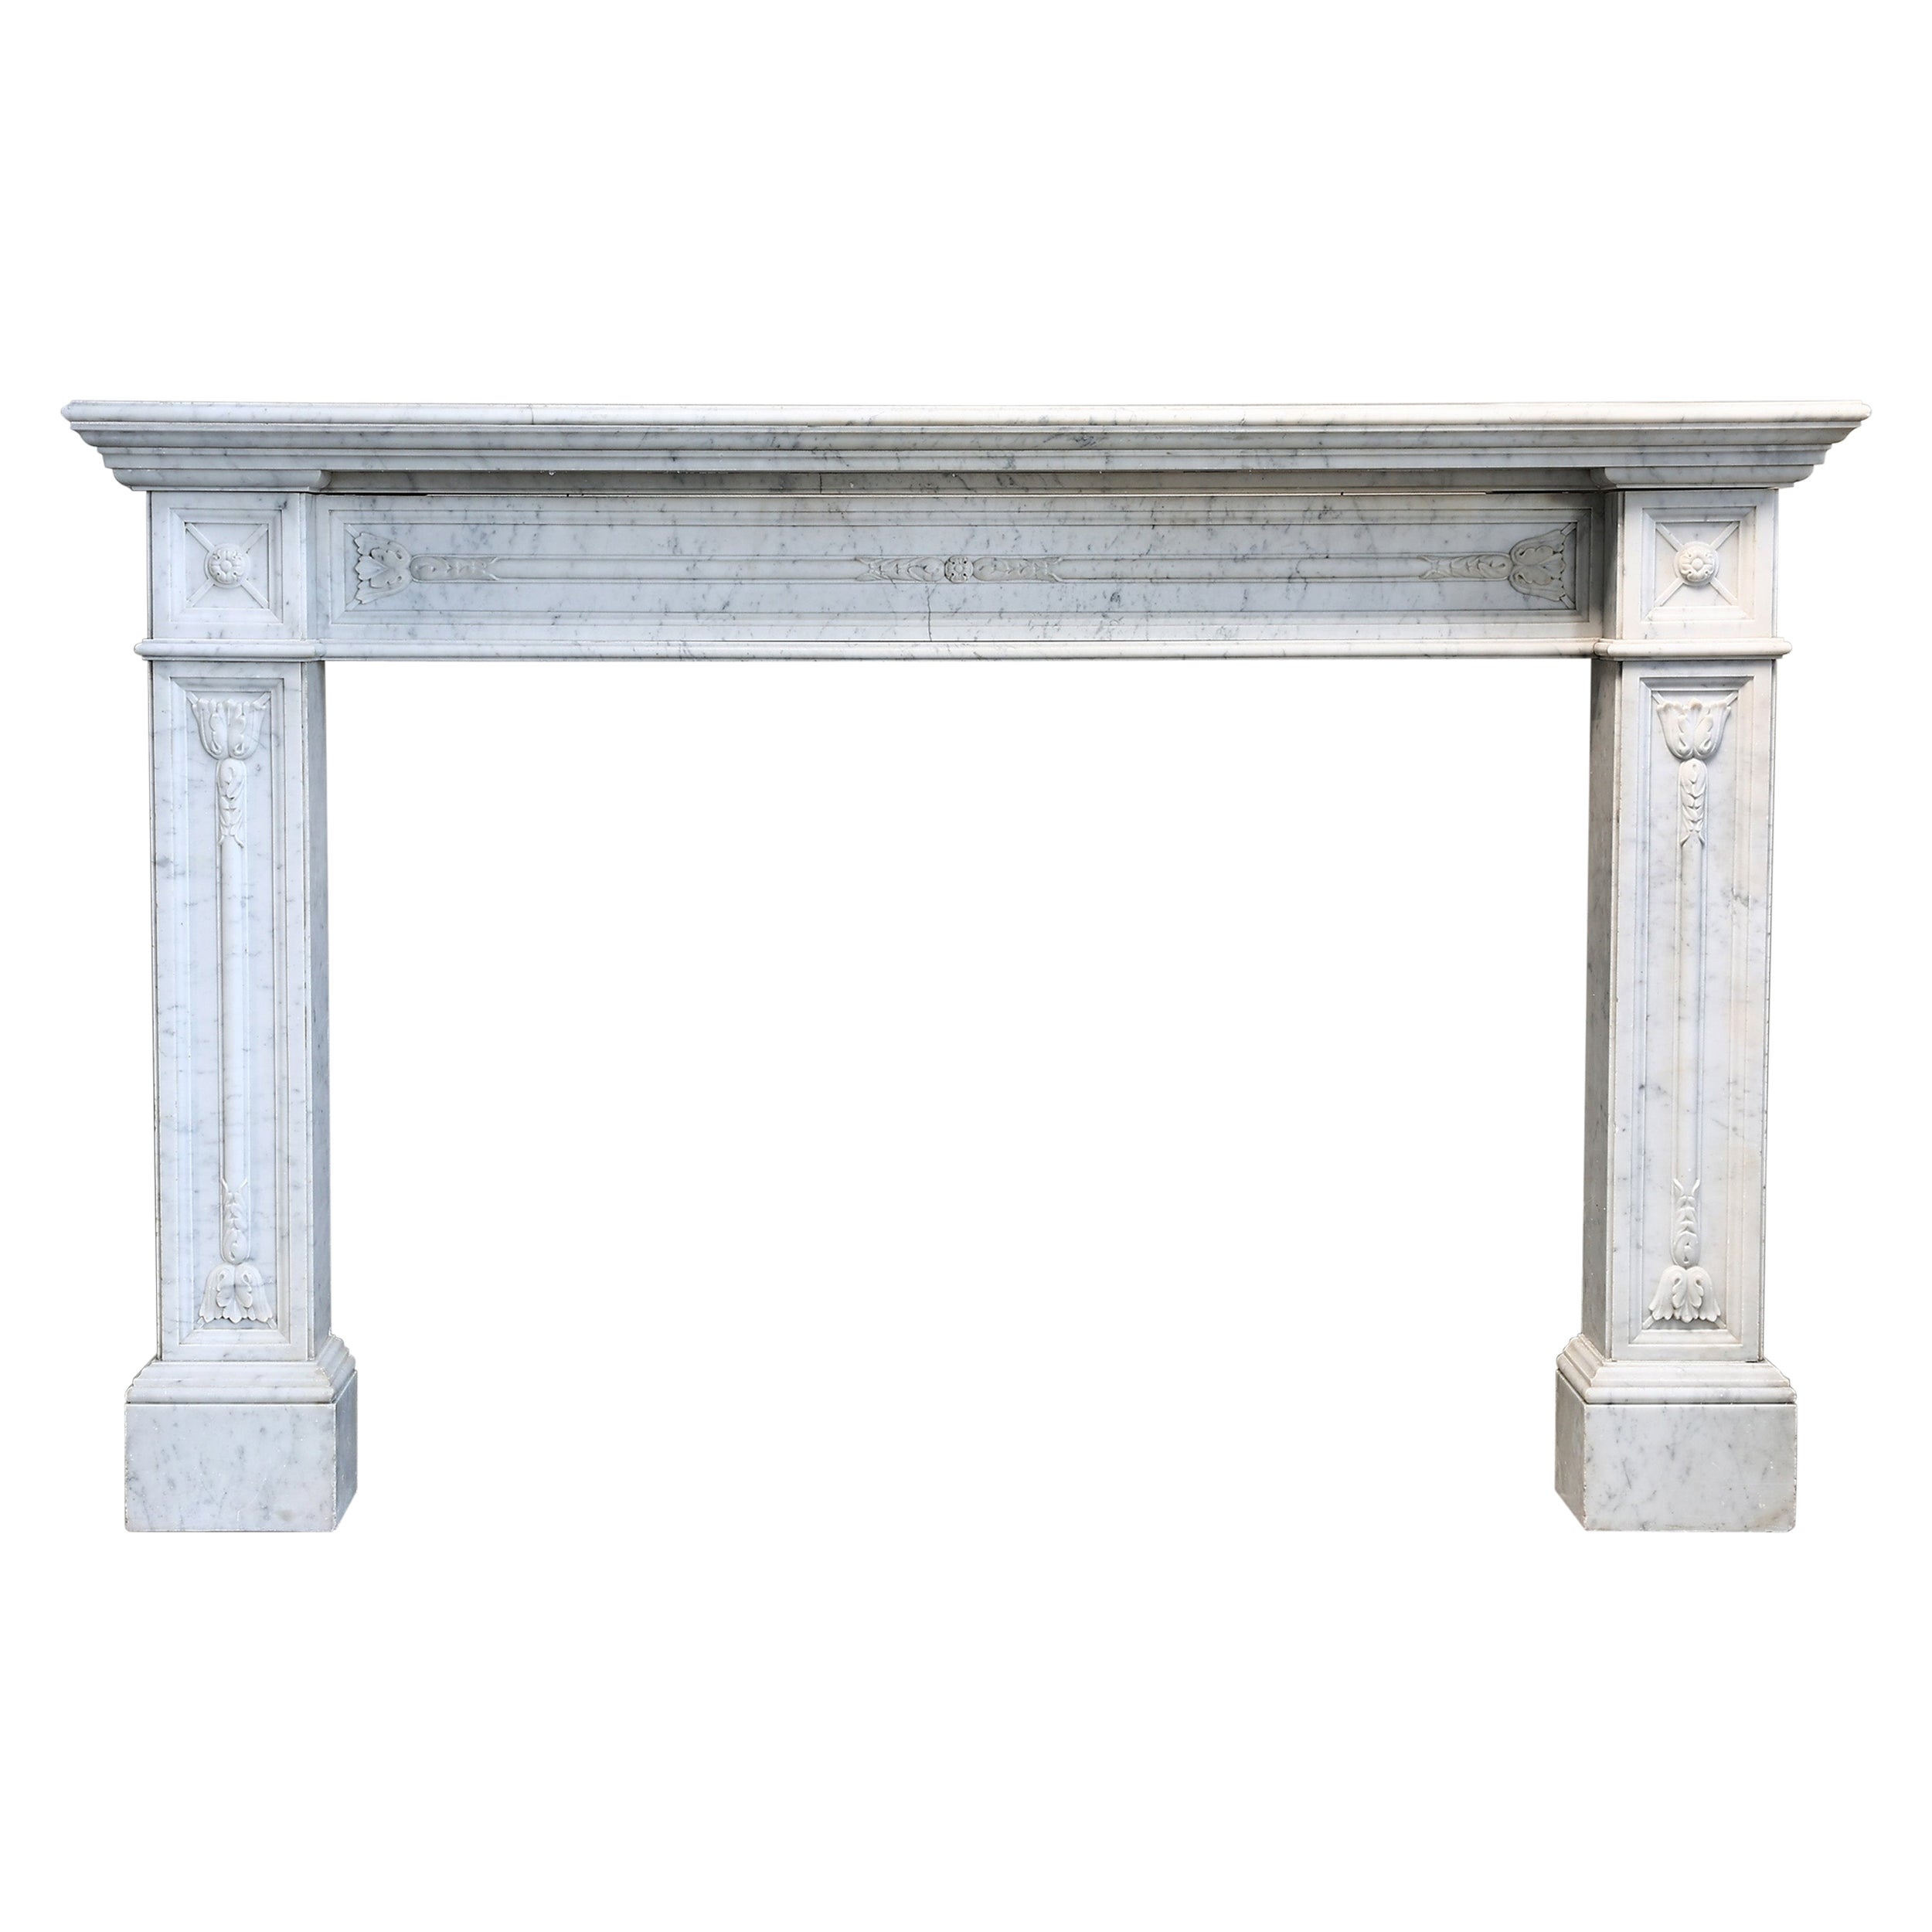 Louis XVI Style Fireplace of Arabescato Marble from the 19th Century For Sale